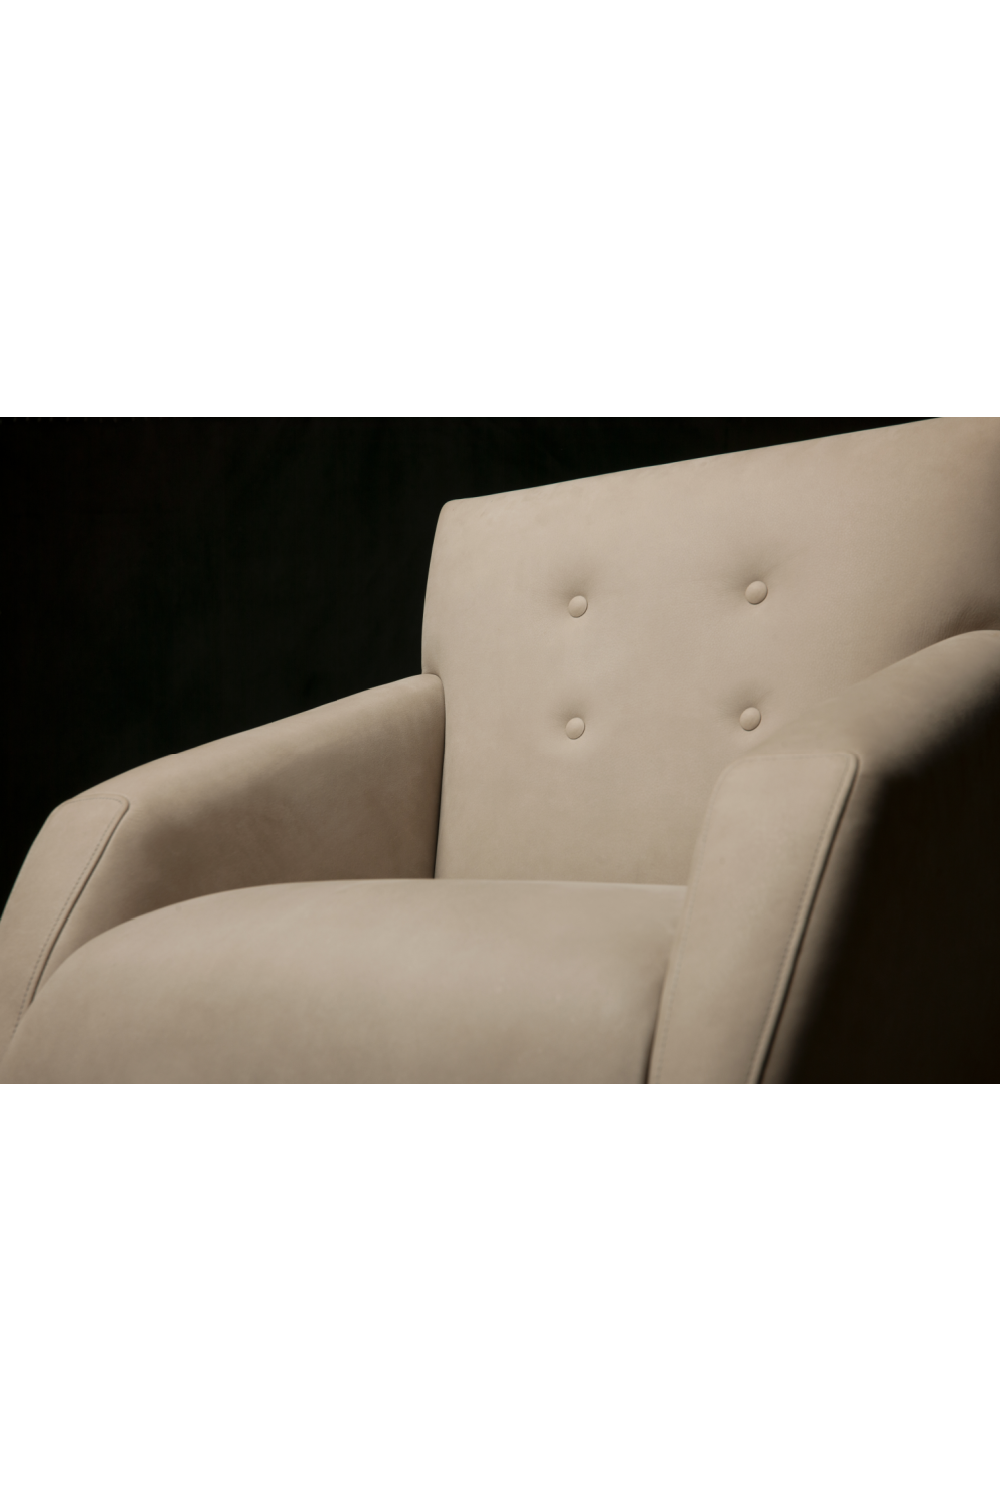 Gray Leather Office Chair | Andrew Martin Kelly | Oroa.com